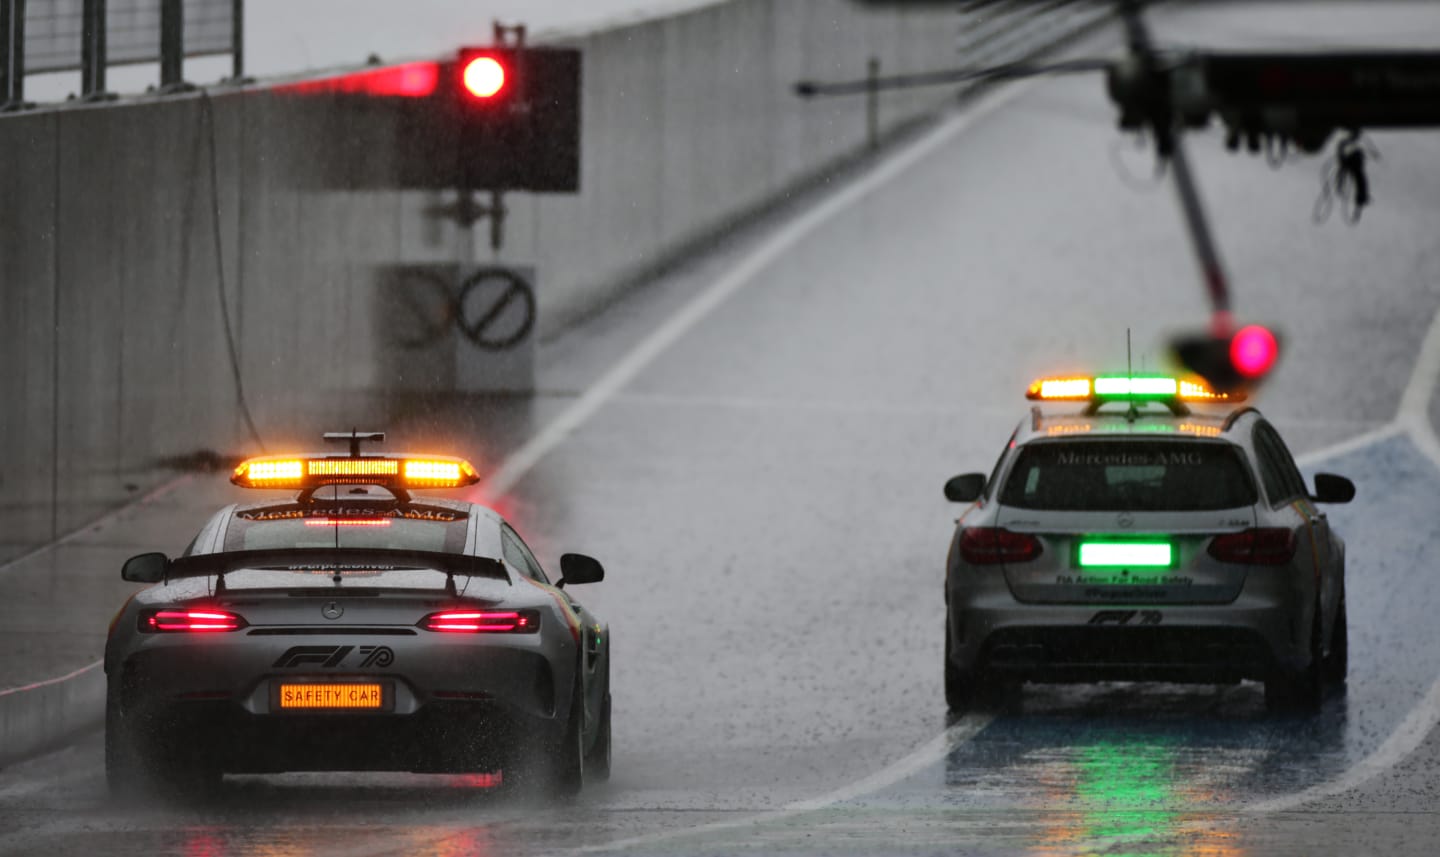 SPIELBERG, AUSTRIA - JULY 11: The safety car and medical car sit at the end of the pitlane in the